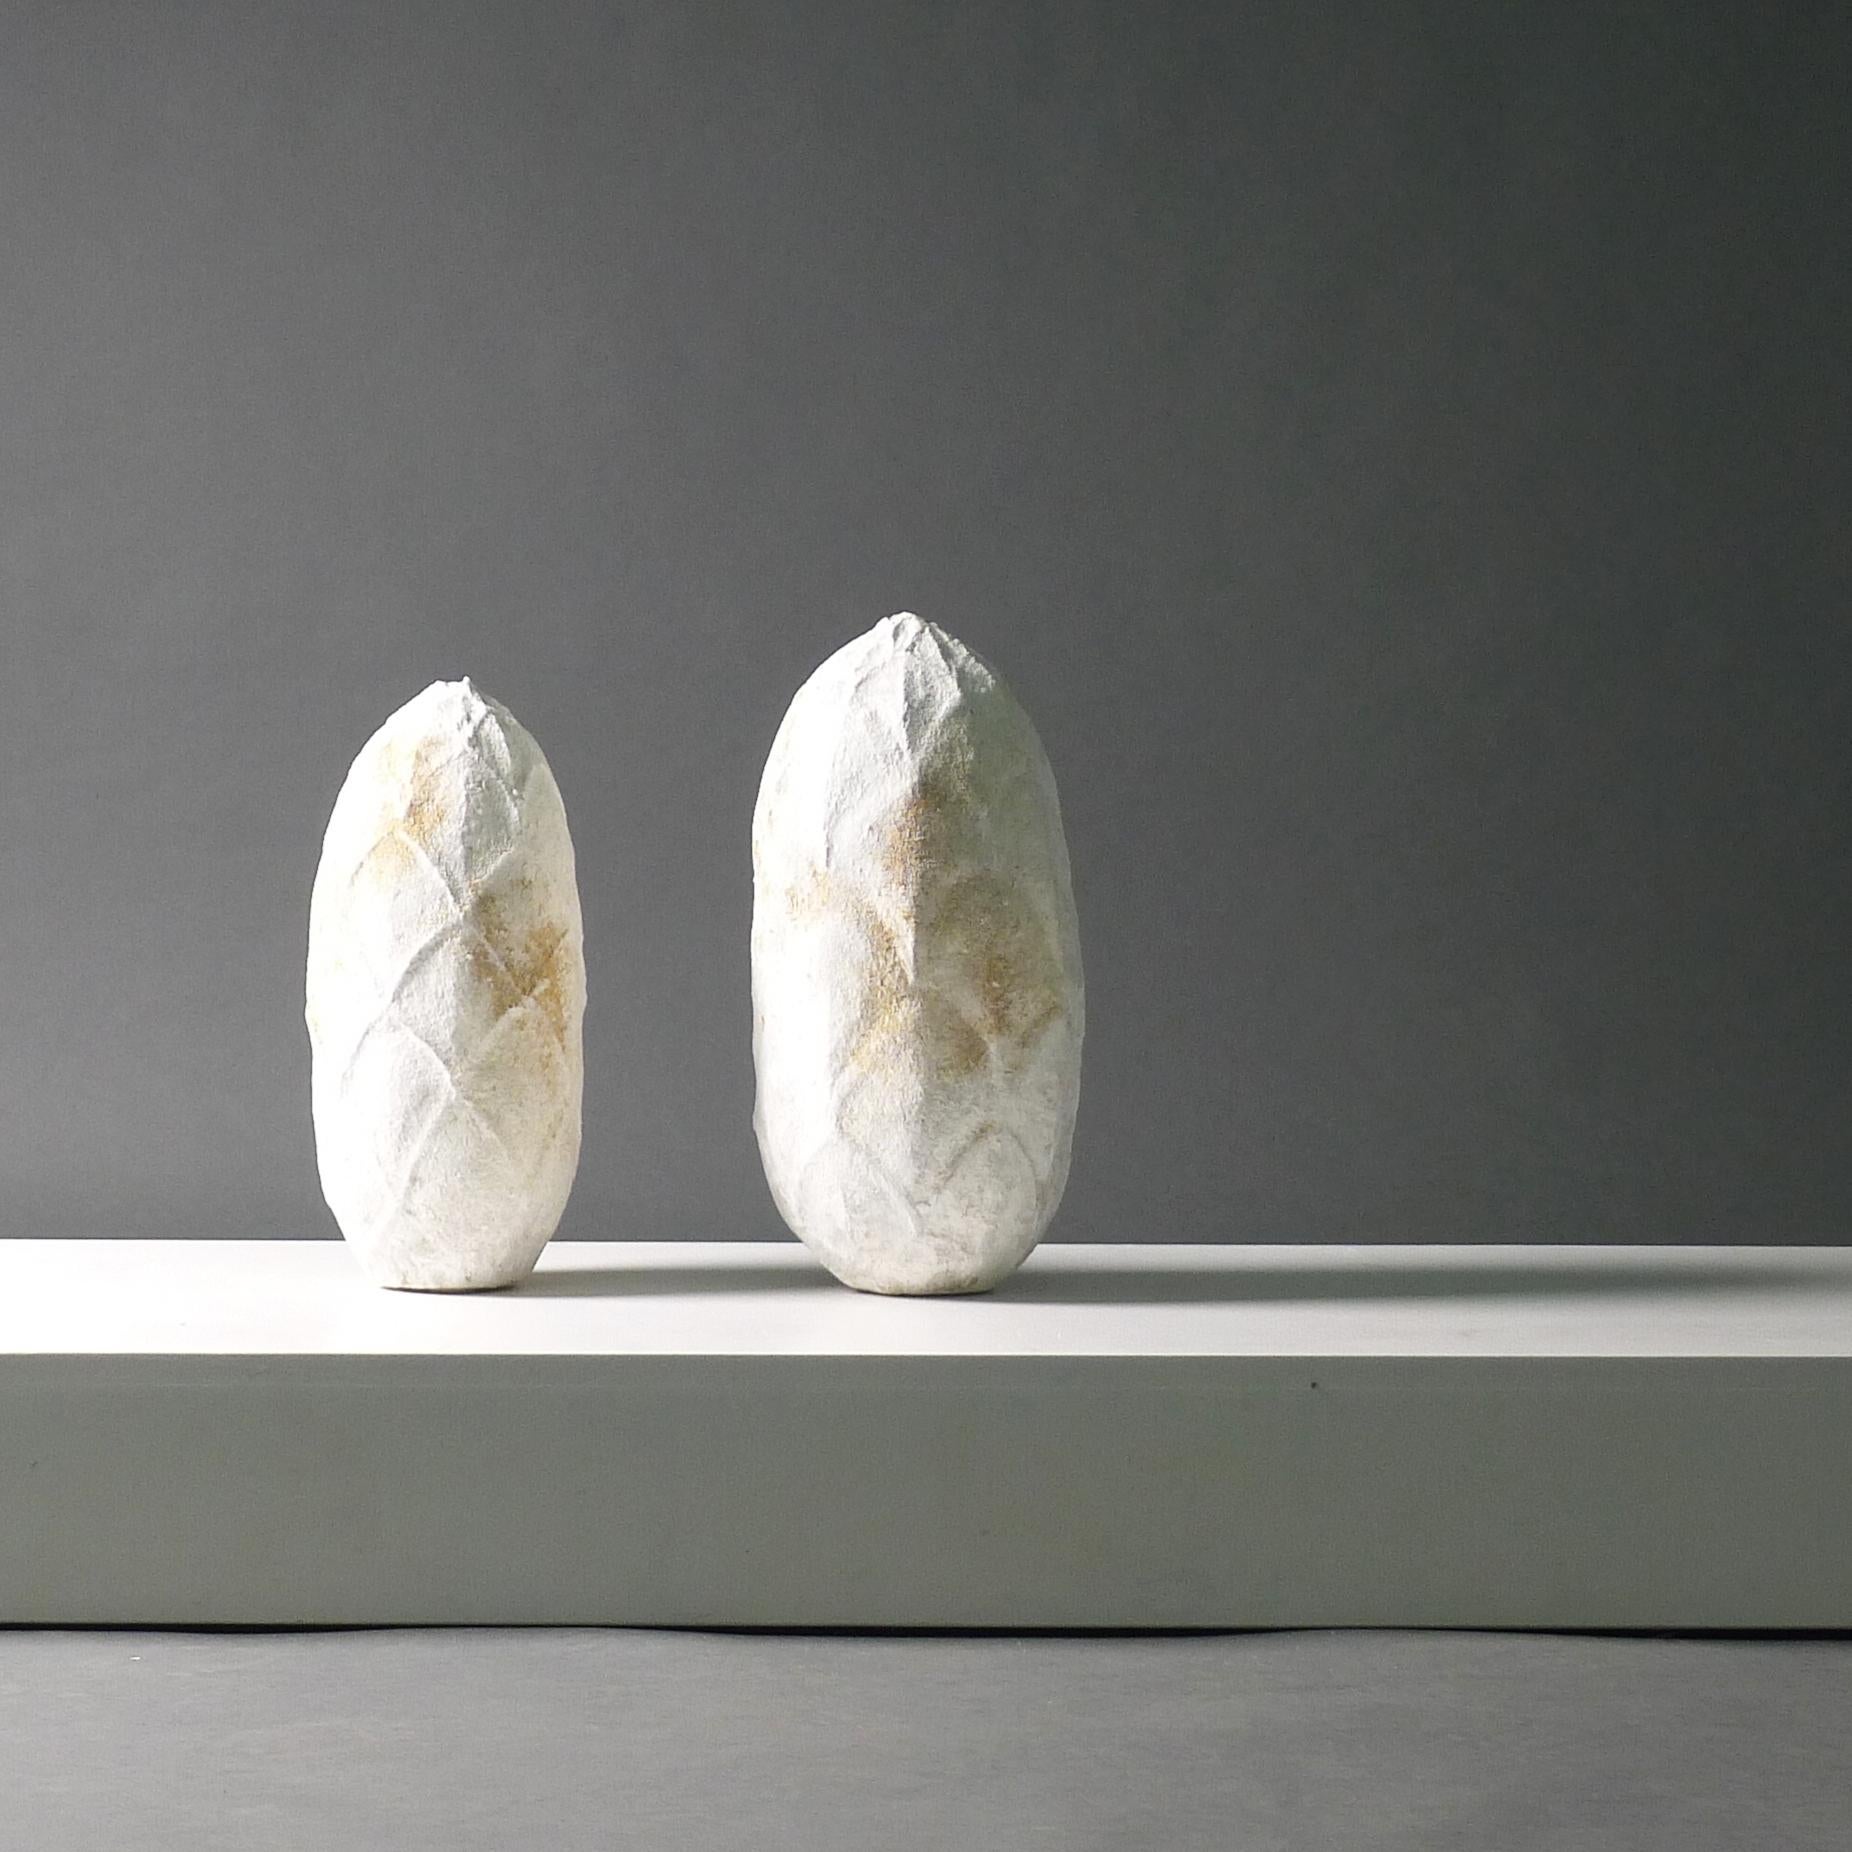 Akiko Hirai (born 1970)
Two Cocoon vessels in stoneware, dry cracked and crawling white slip over a mottled brown body, tall enclosed ovoid form with facetted sides
the largest 42cm high, 19cm diameter
Price is for both vessels.